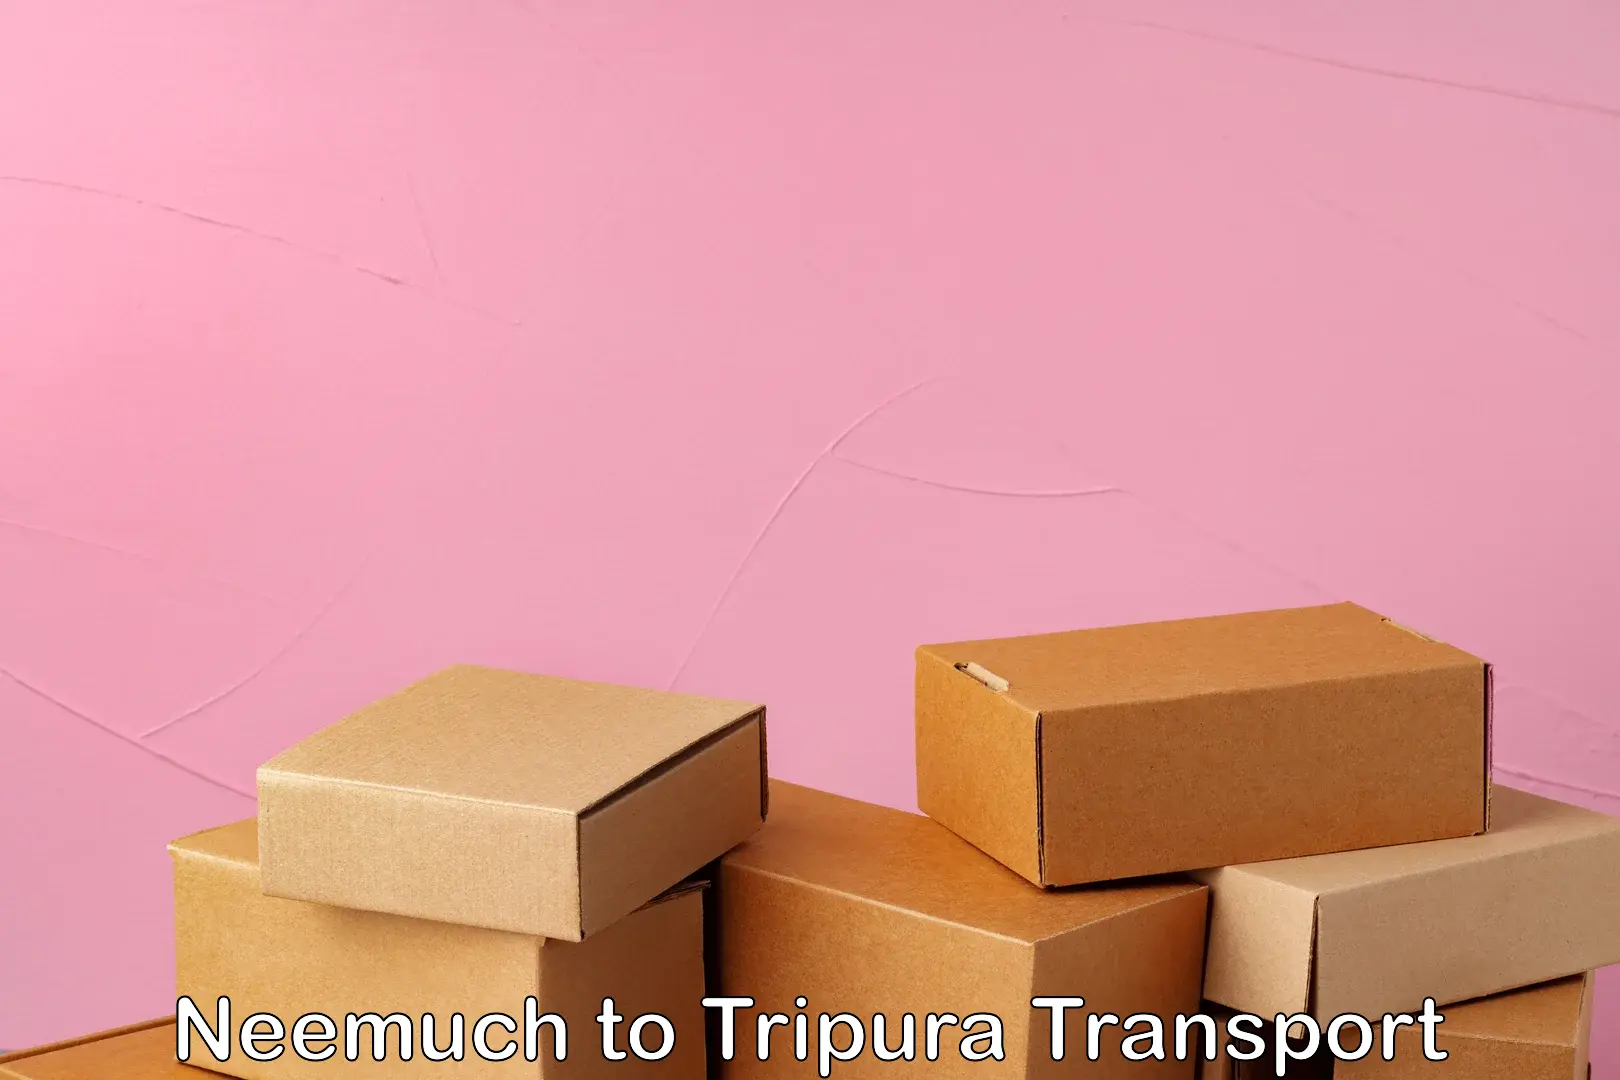 Container transport service Neemuch to Tripura